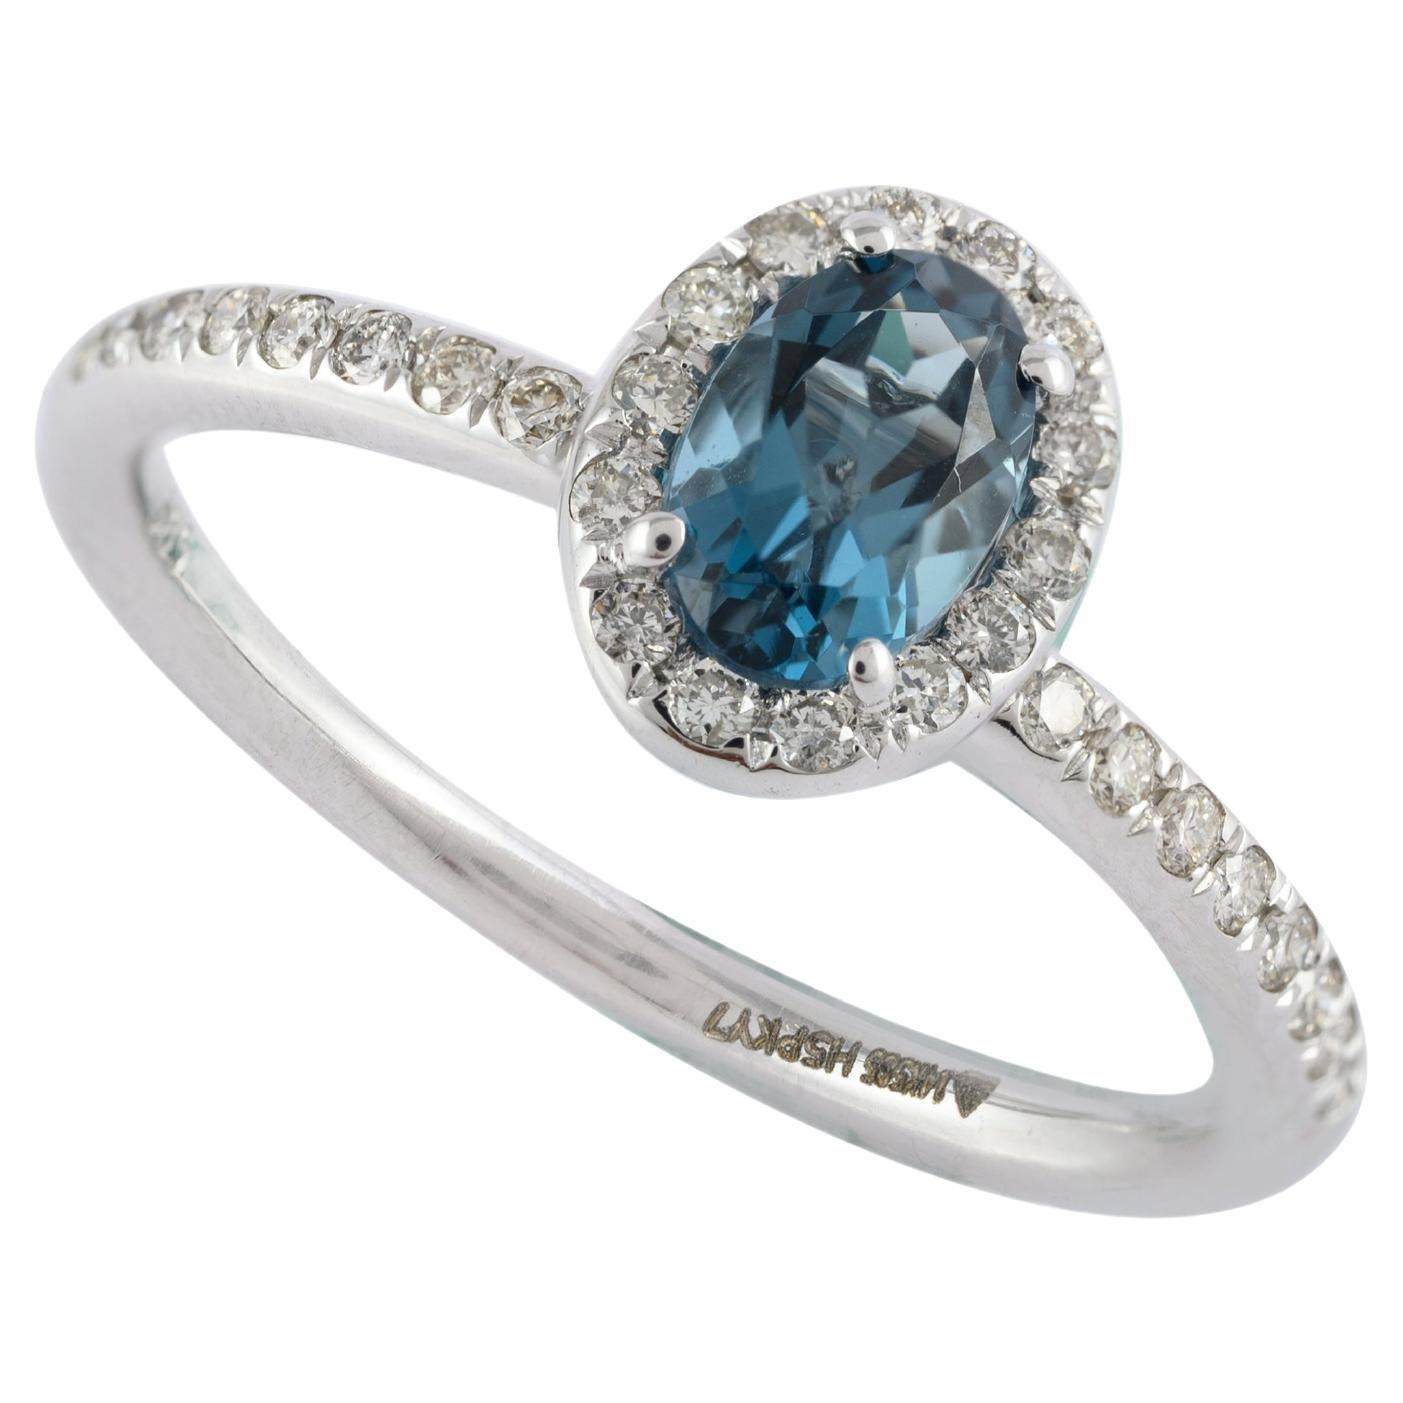 Natural 5.84 ct Blue Topaz and Halo Diamond Classic Ring in 14 Karat White Gold